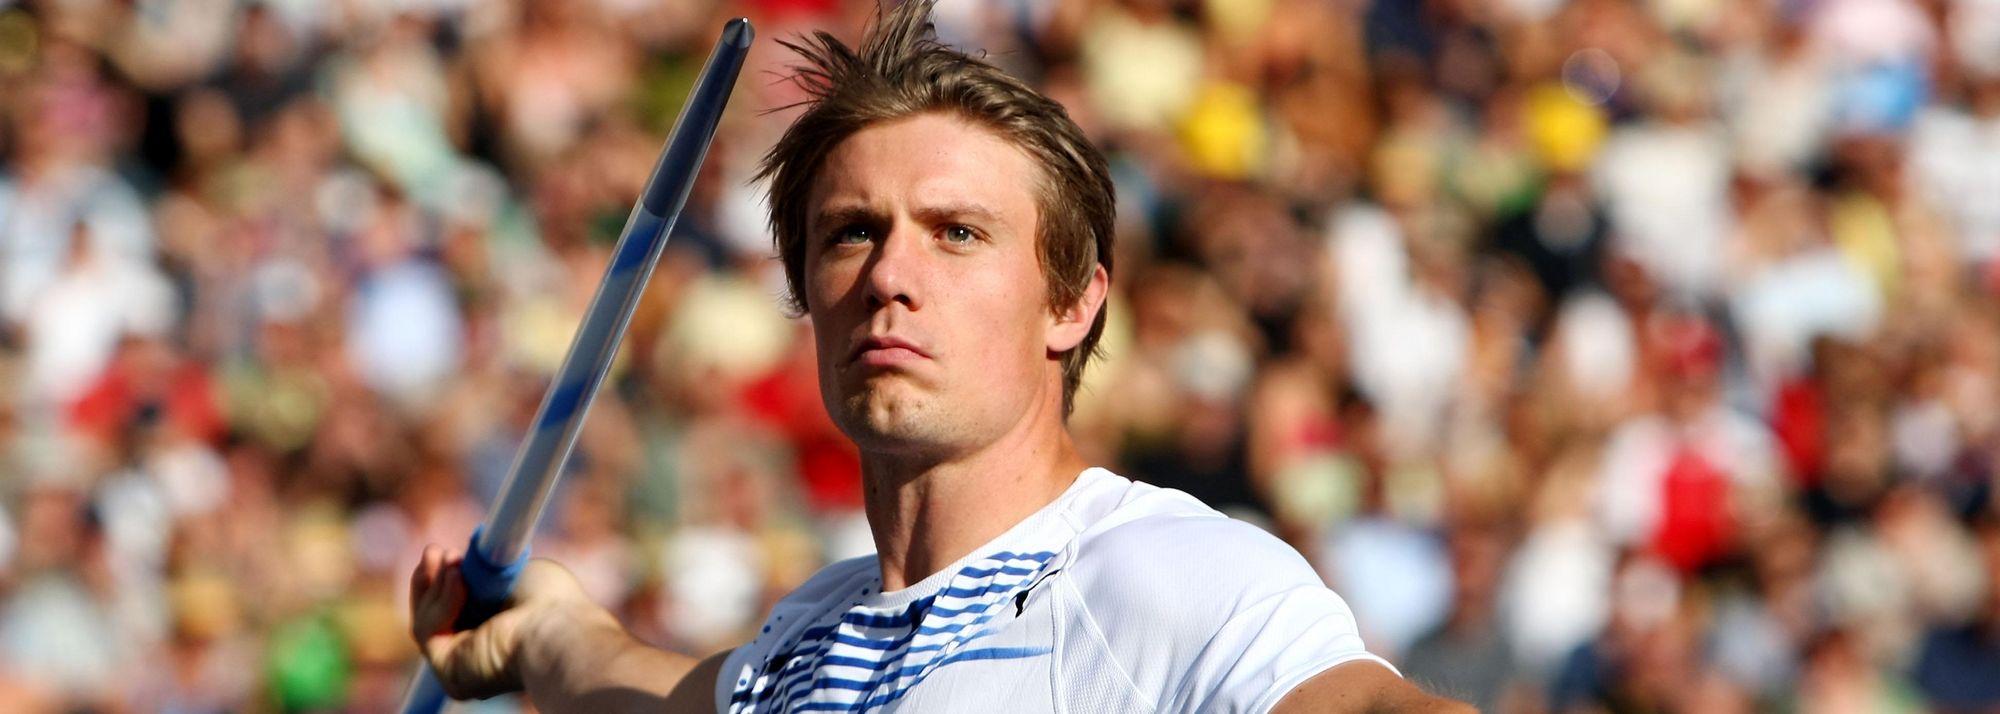 Andreas Thorkildsen made a breakthrough when he won the World title in Berlin. Finally, he had done something no other javelin thrower has done which is hold World, Olympic and European titles simultaneously. Not even the great Jan Zelezny achieved that; he always fell short at the European championships.